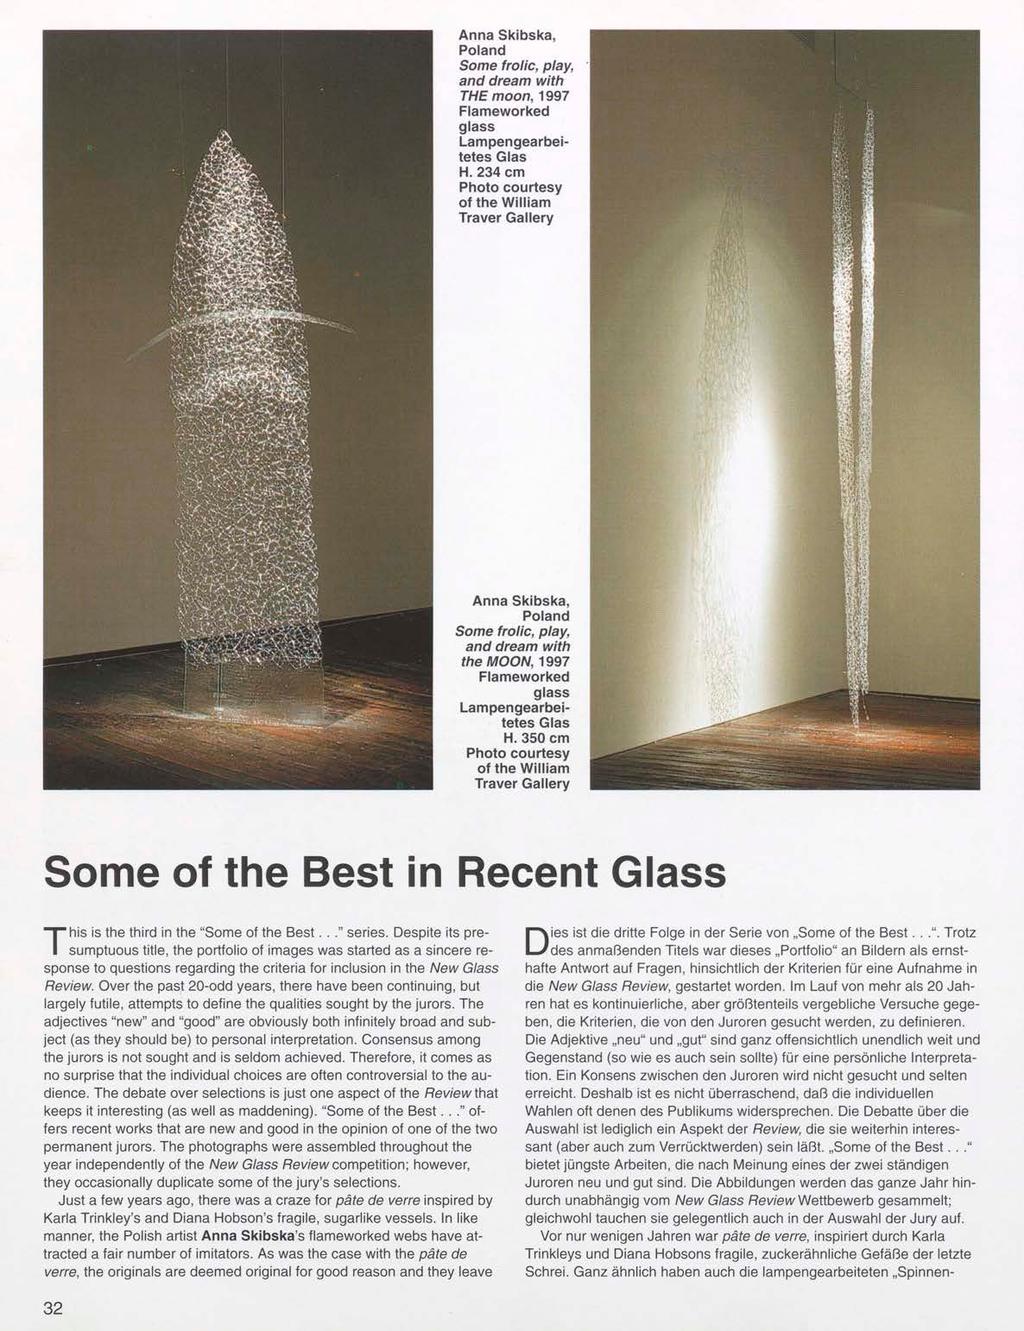 99&a ^ Anna Skibska, Poland Some frolic, play, and dream with THE moon, 1997 Flameworked glass Lampengearbeitetes Glas H. 234 cm Photo courtesy of the William Traver Gallery wm m^m.rtf <.